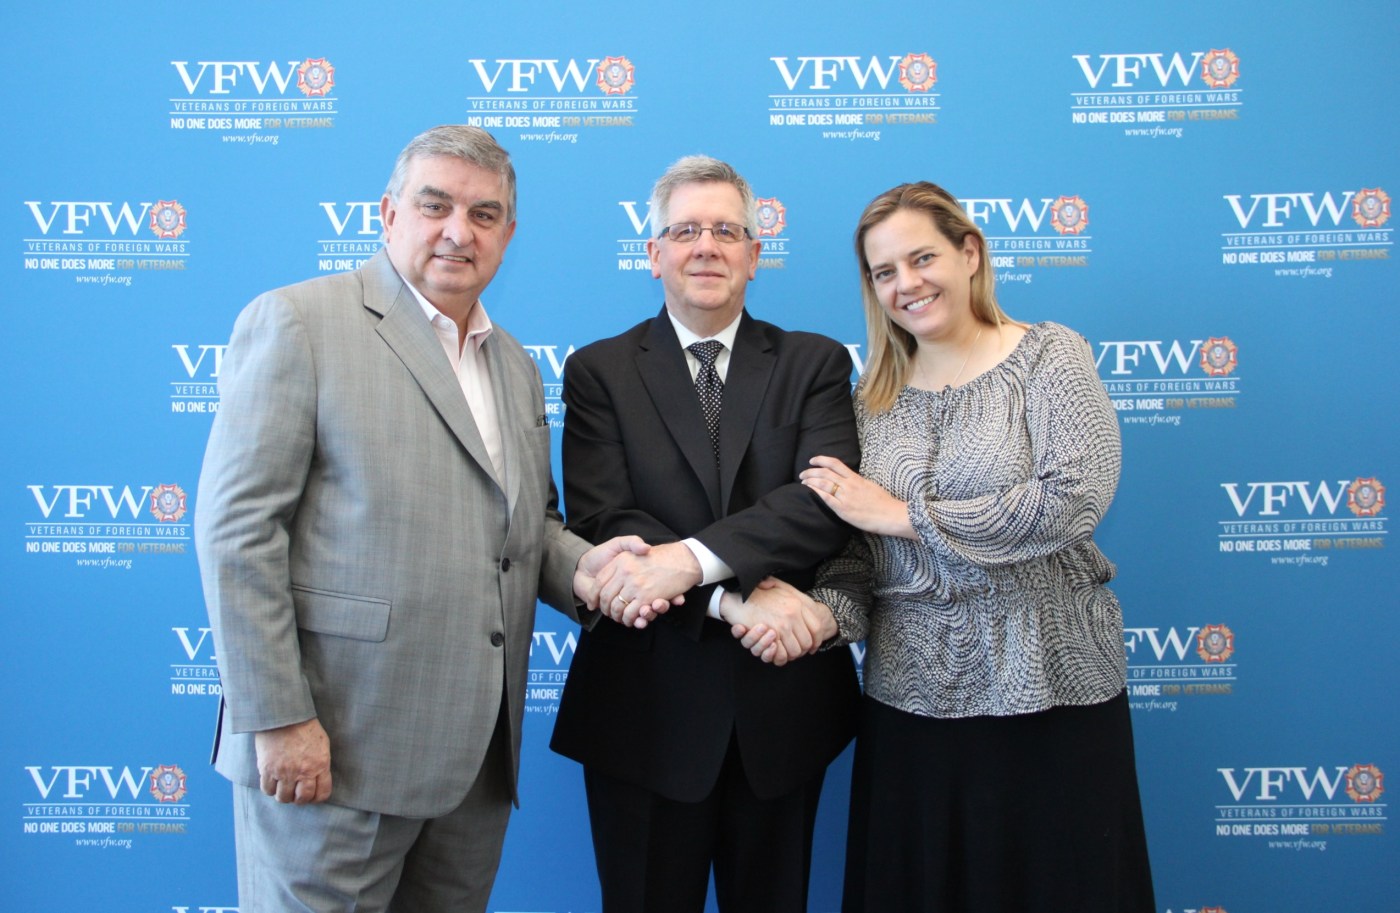 VA, VFW and Walgreens collaborate to enhance Veterans’ access to mental health resources